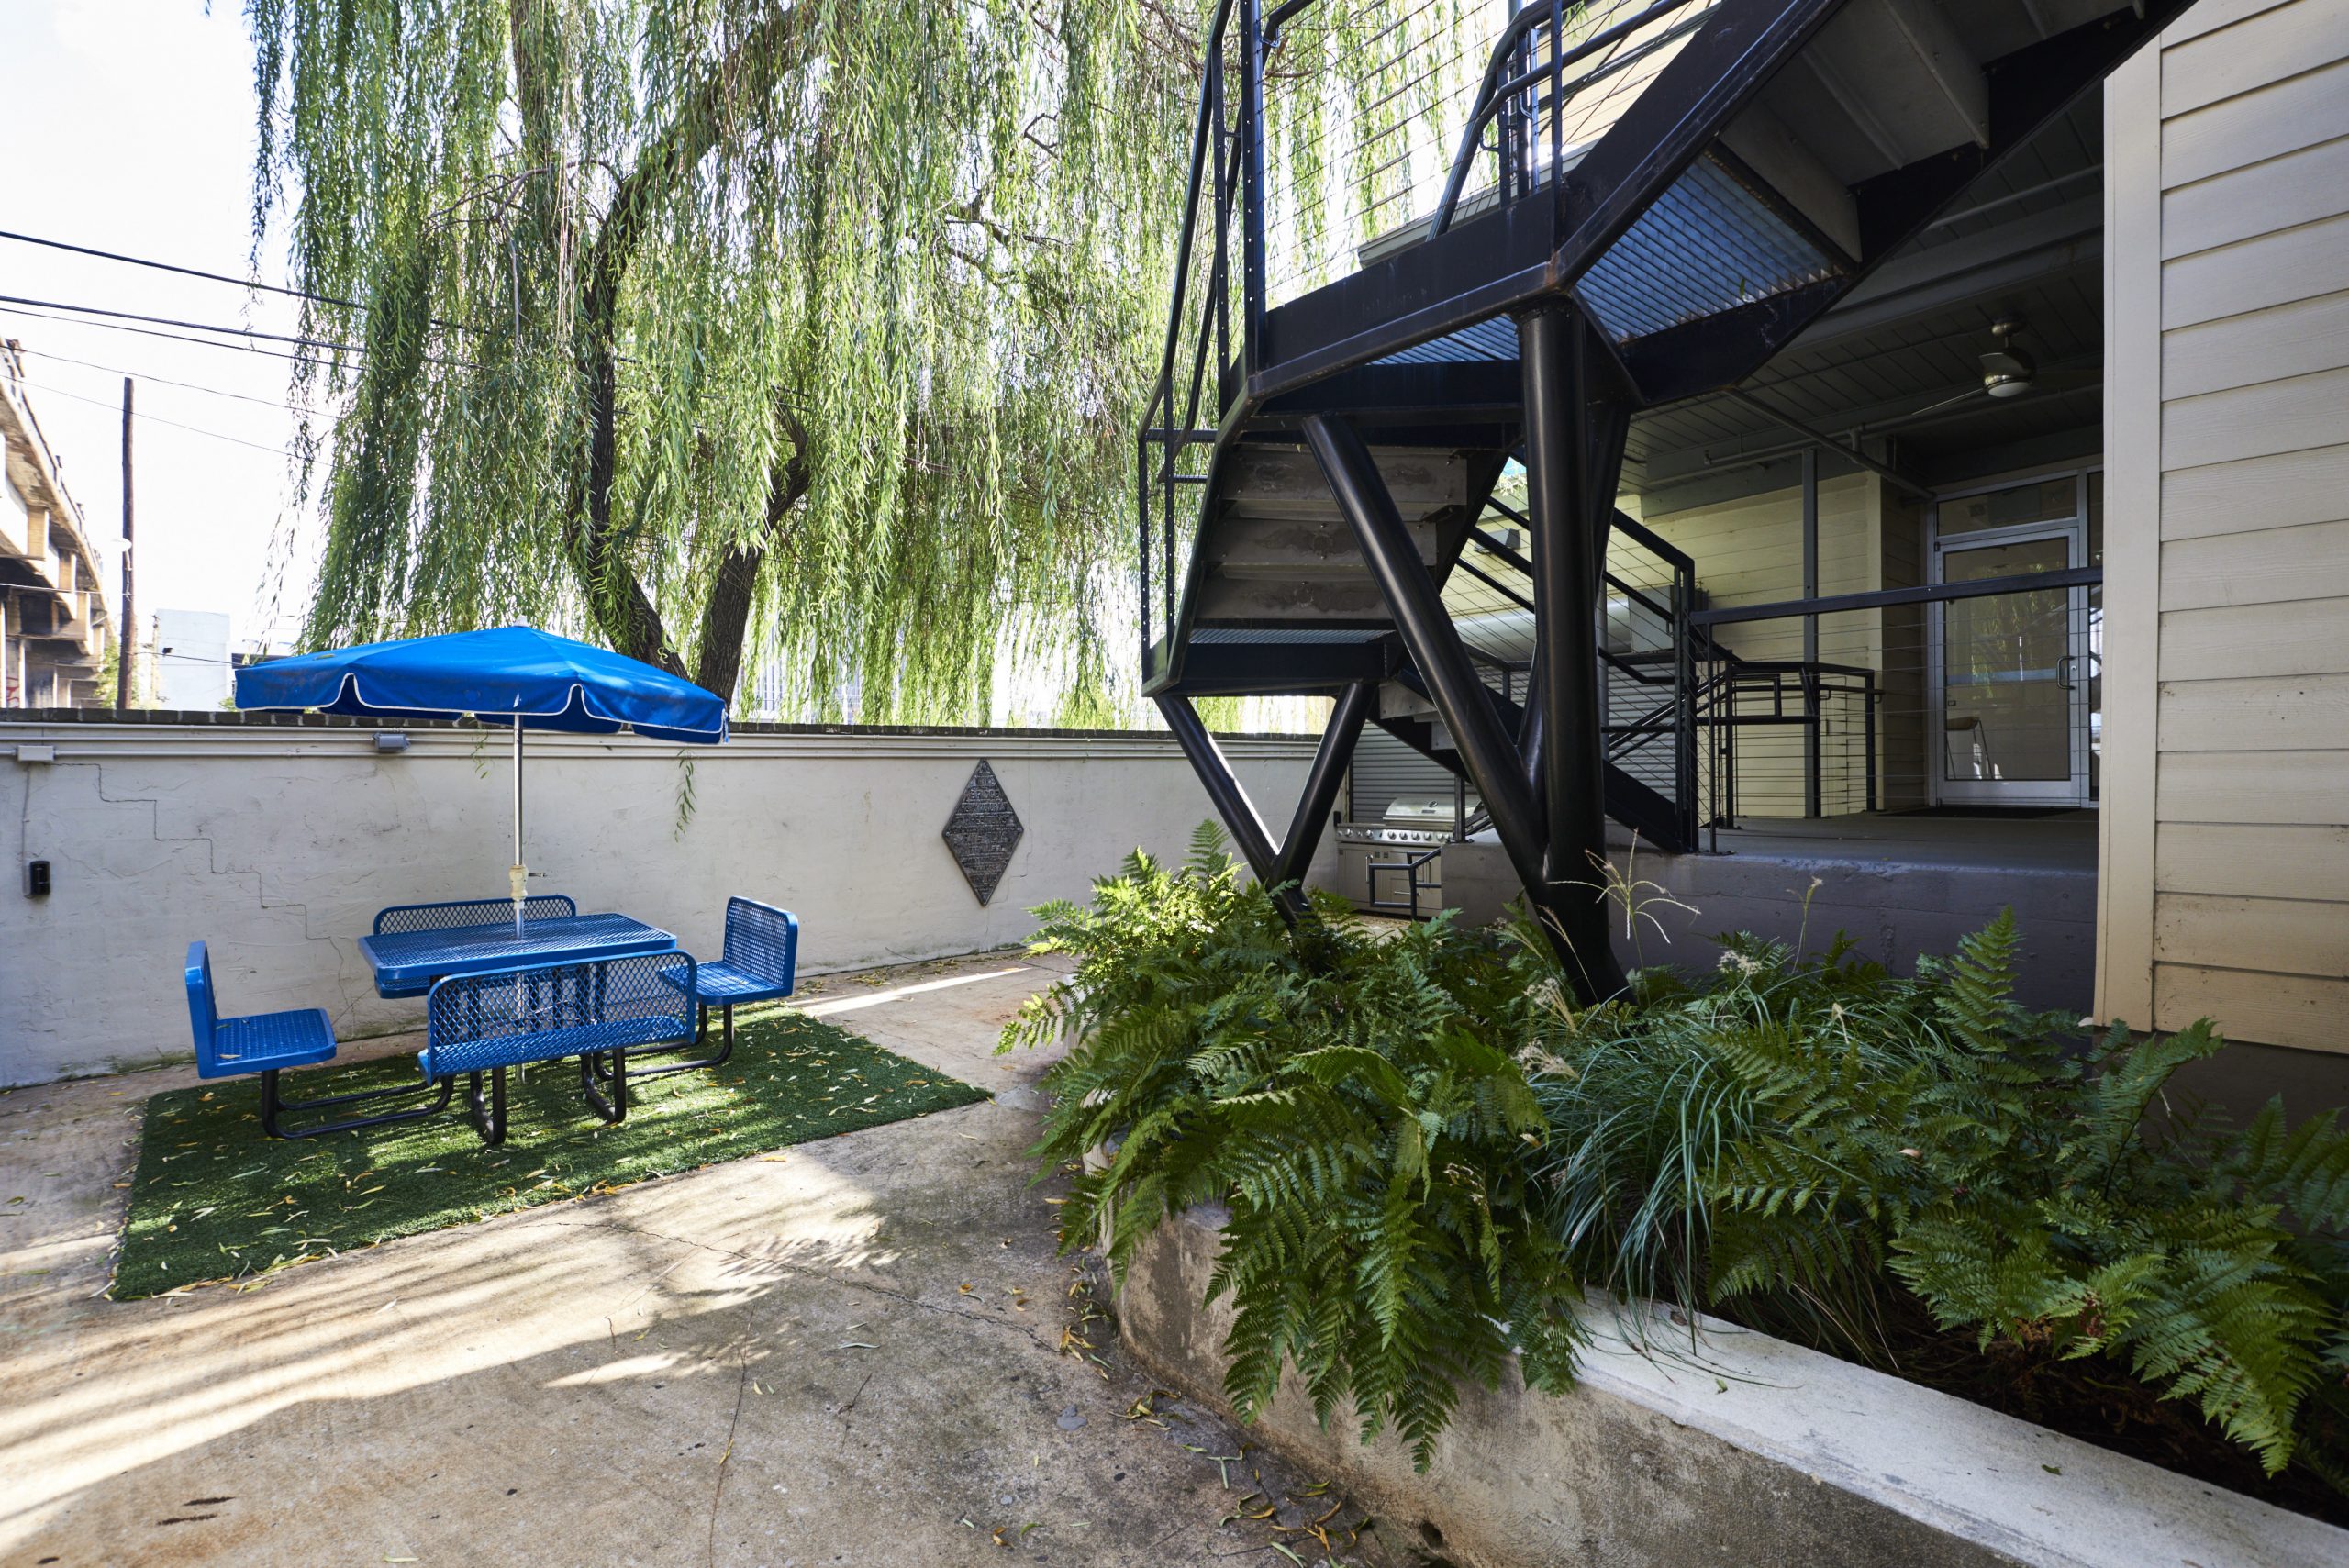 Photo of Kinetic's outdoor dining area with a table and umbrella.